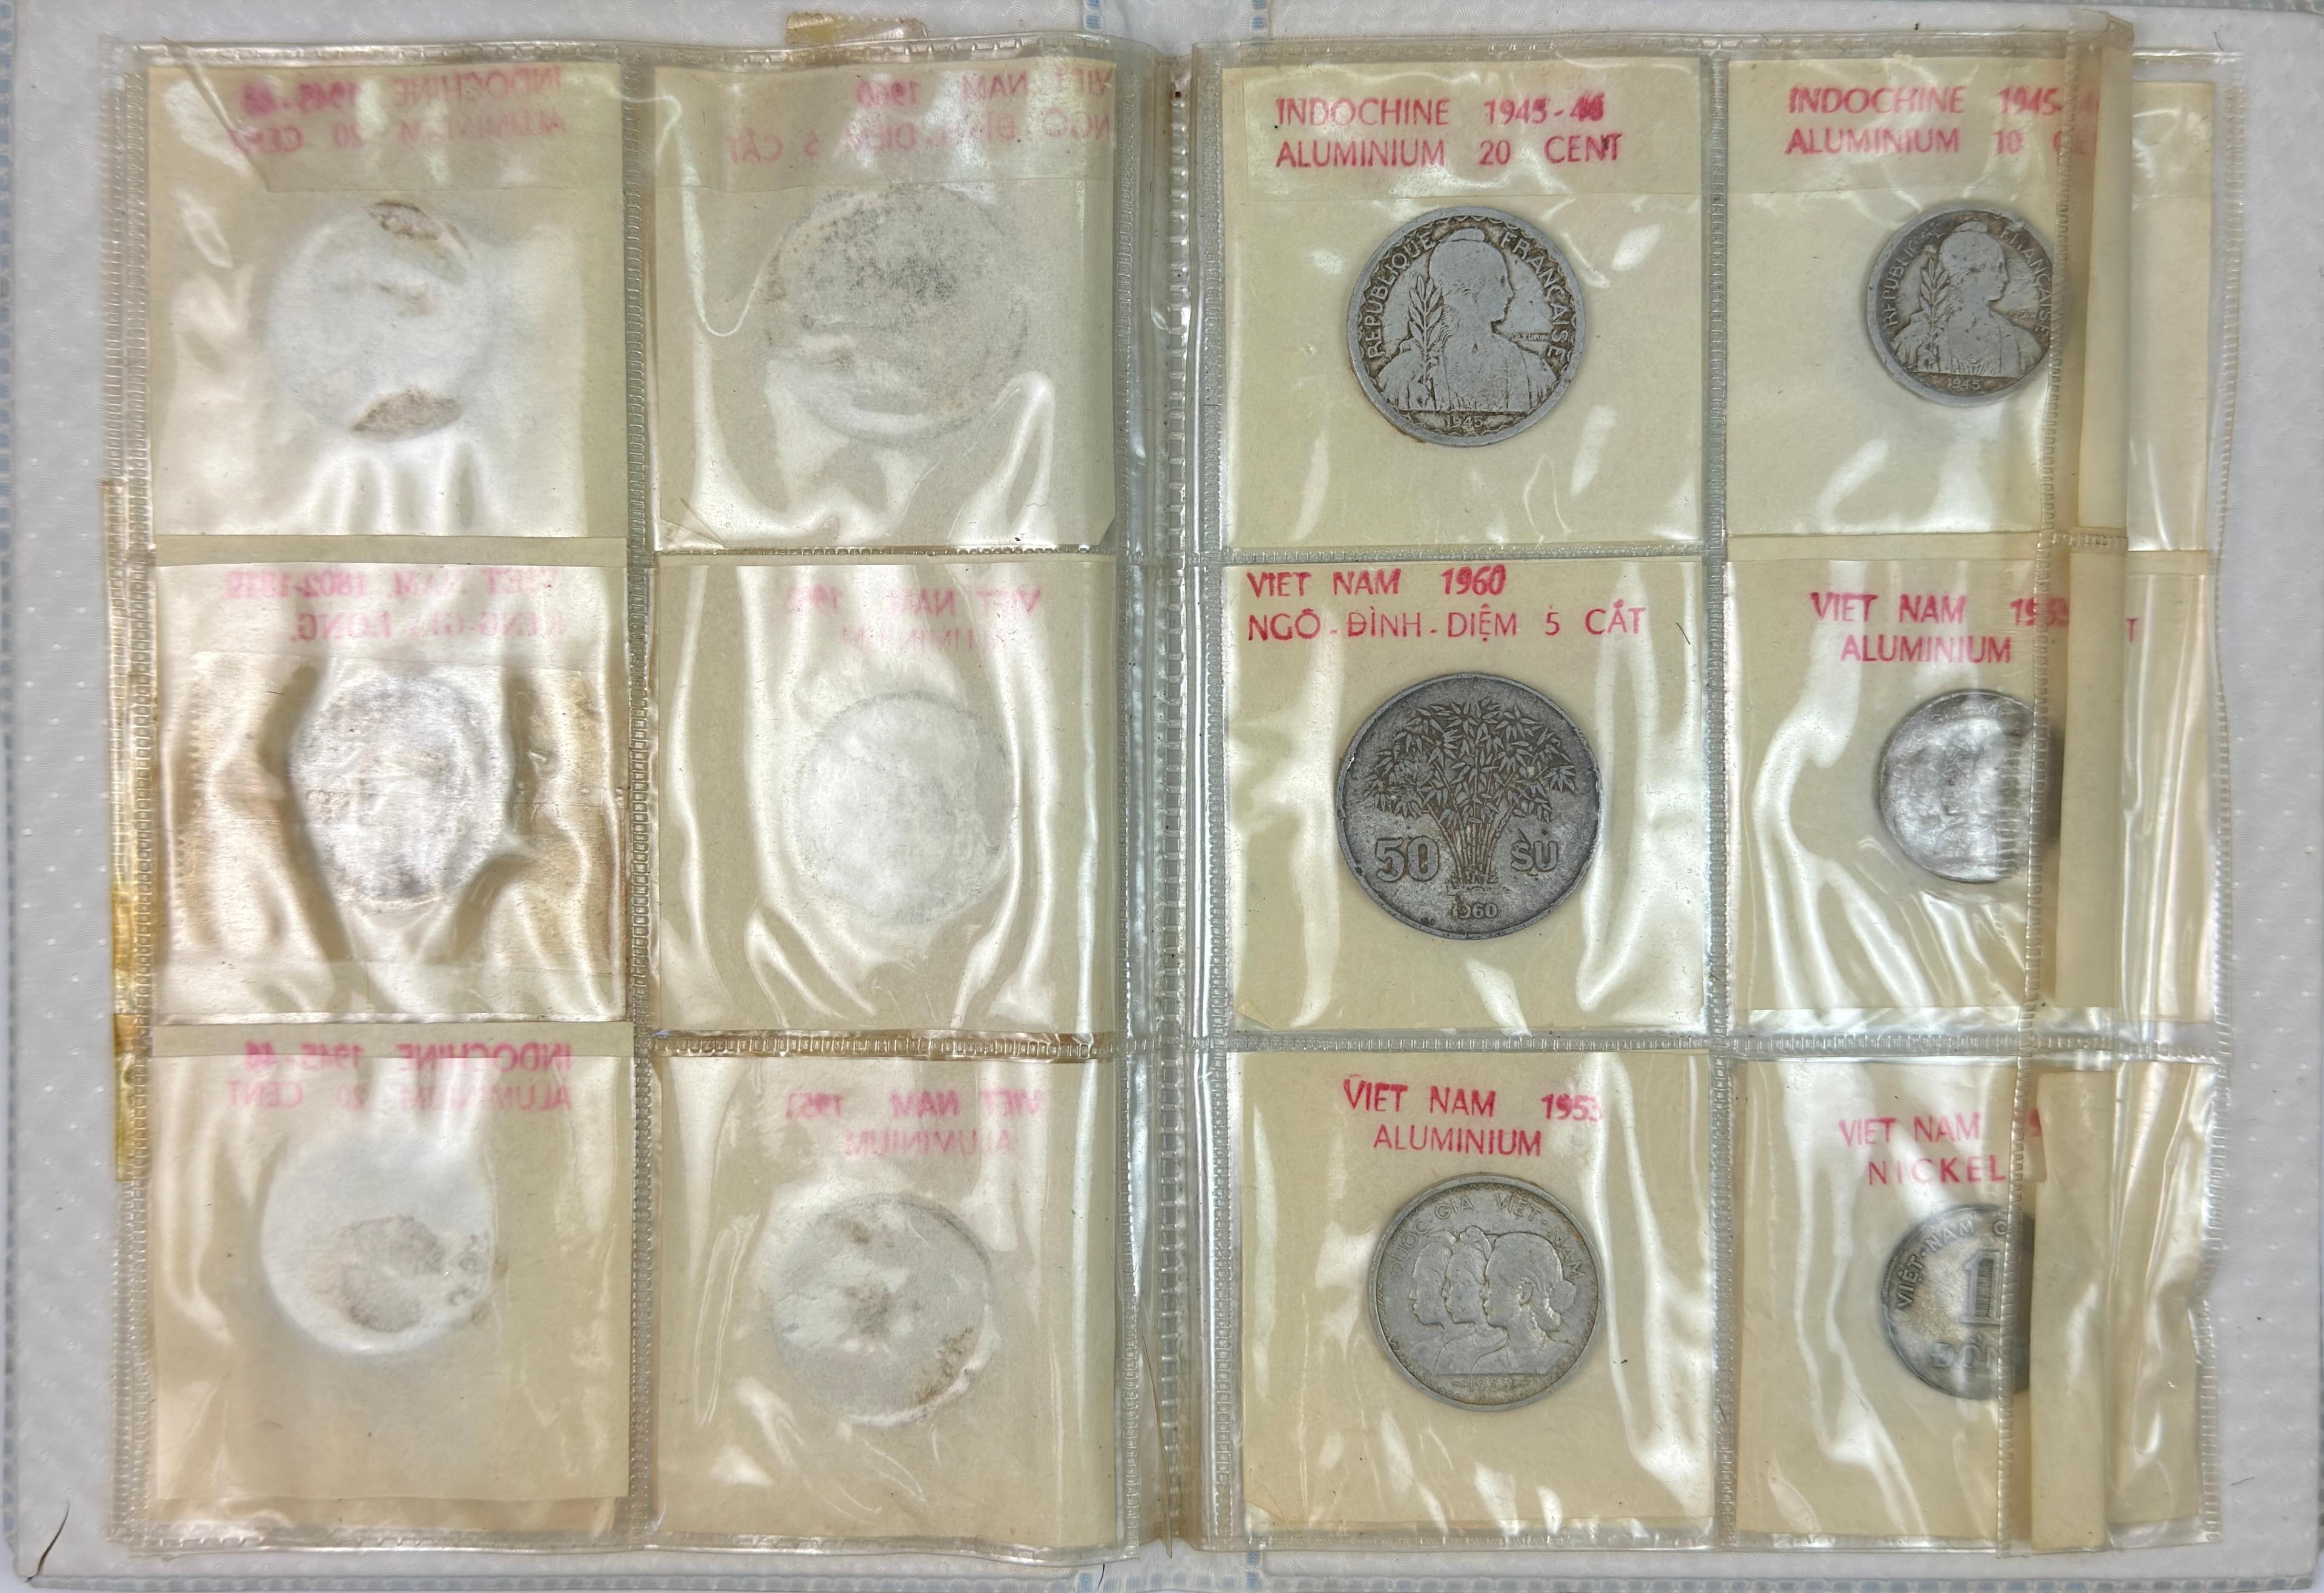 Lot of 2 albums of 23 1940s-1960s Vietnam (Annam) coins